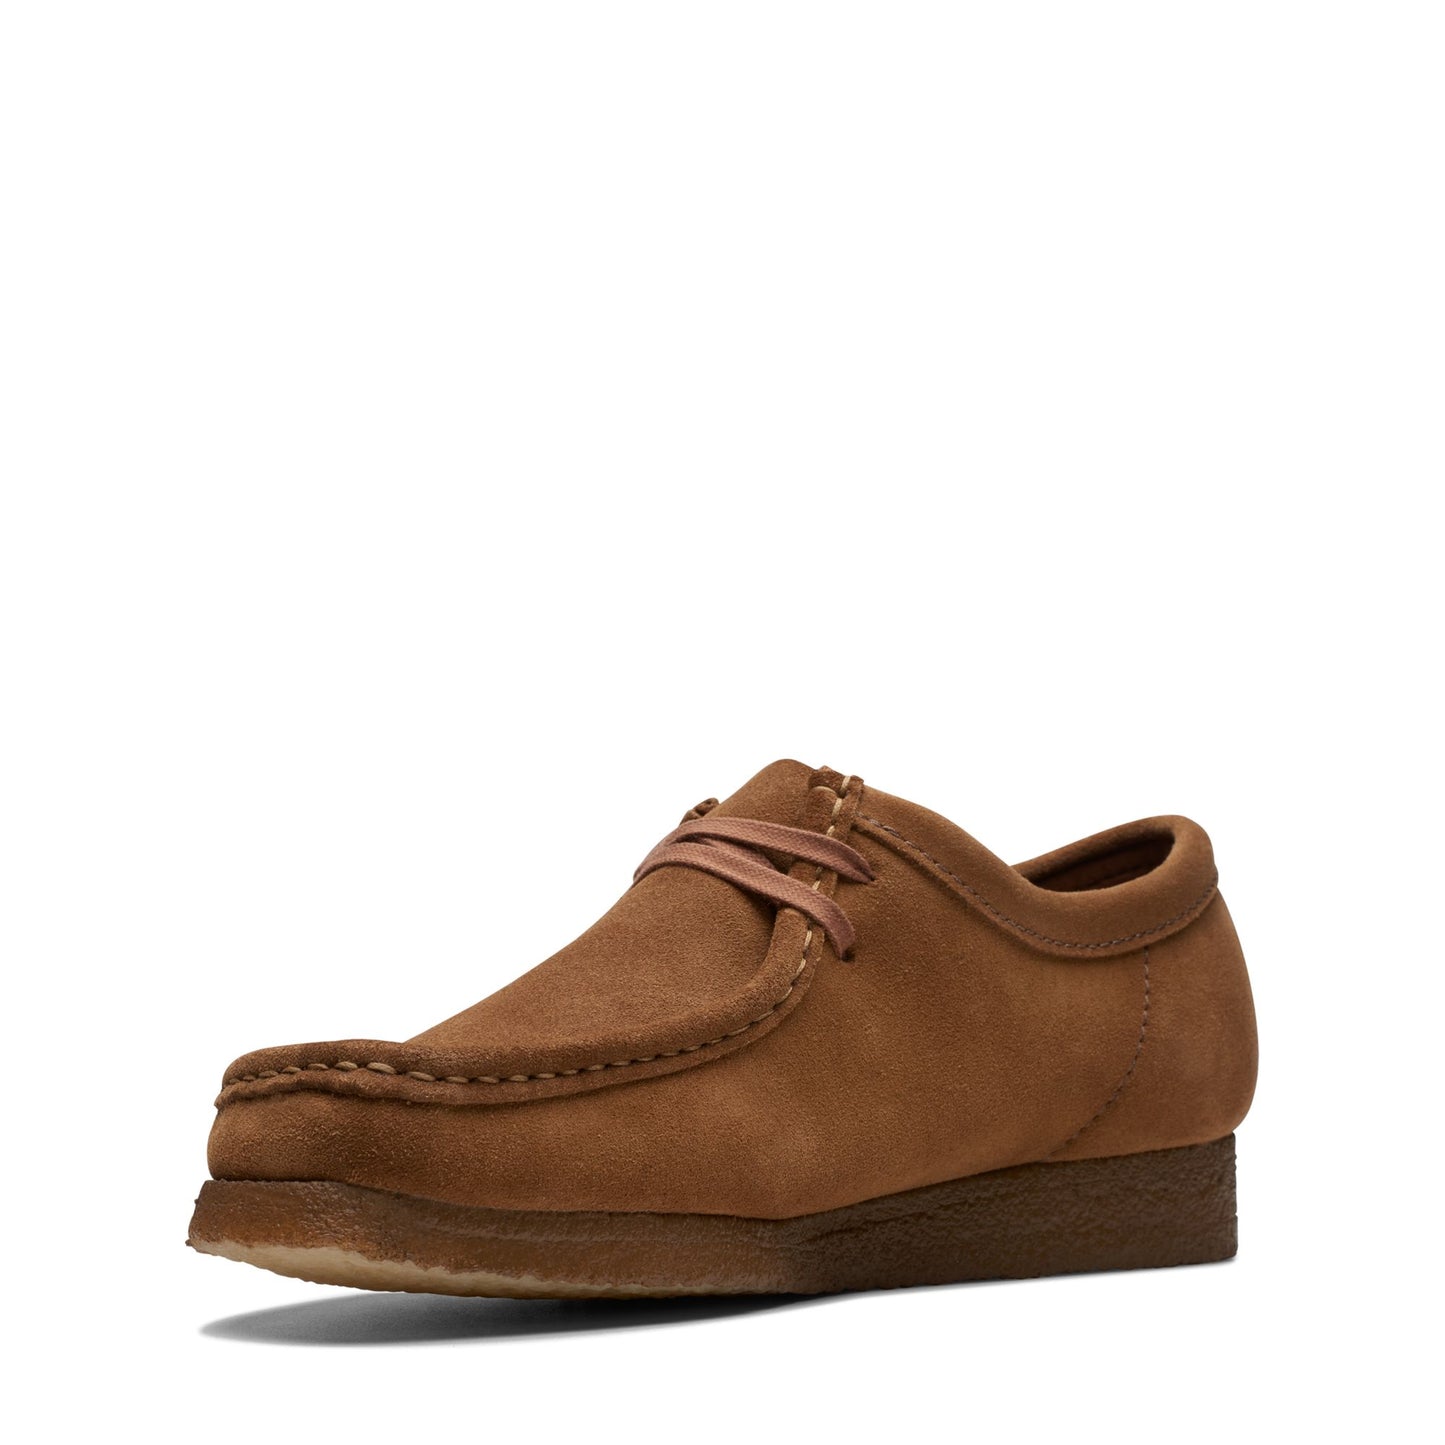 CLARKS WALLABEE LACE-UP SHOE - COLA